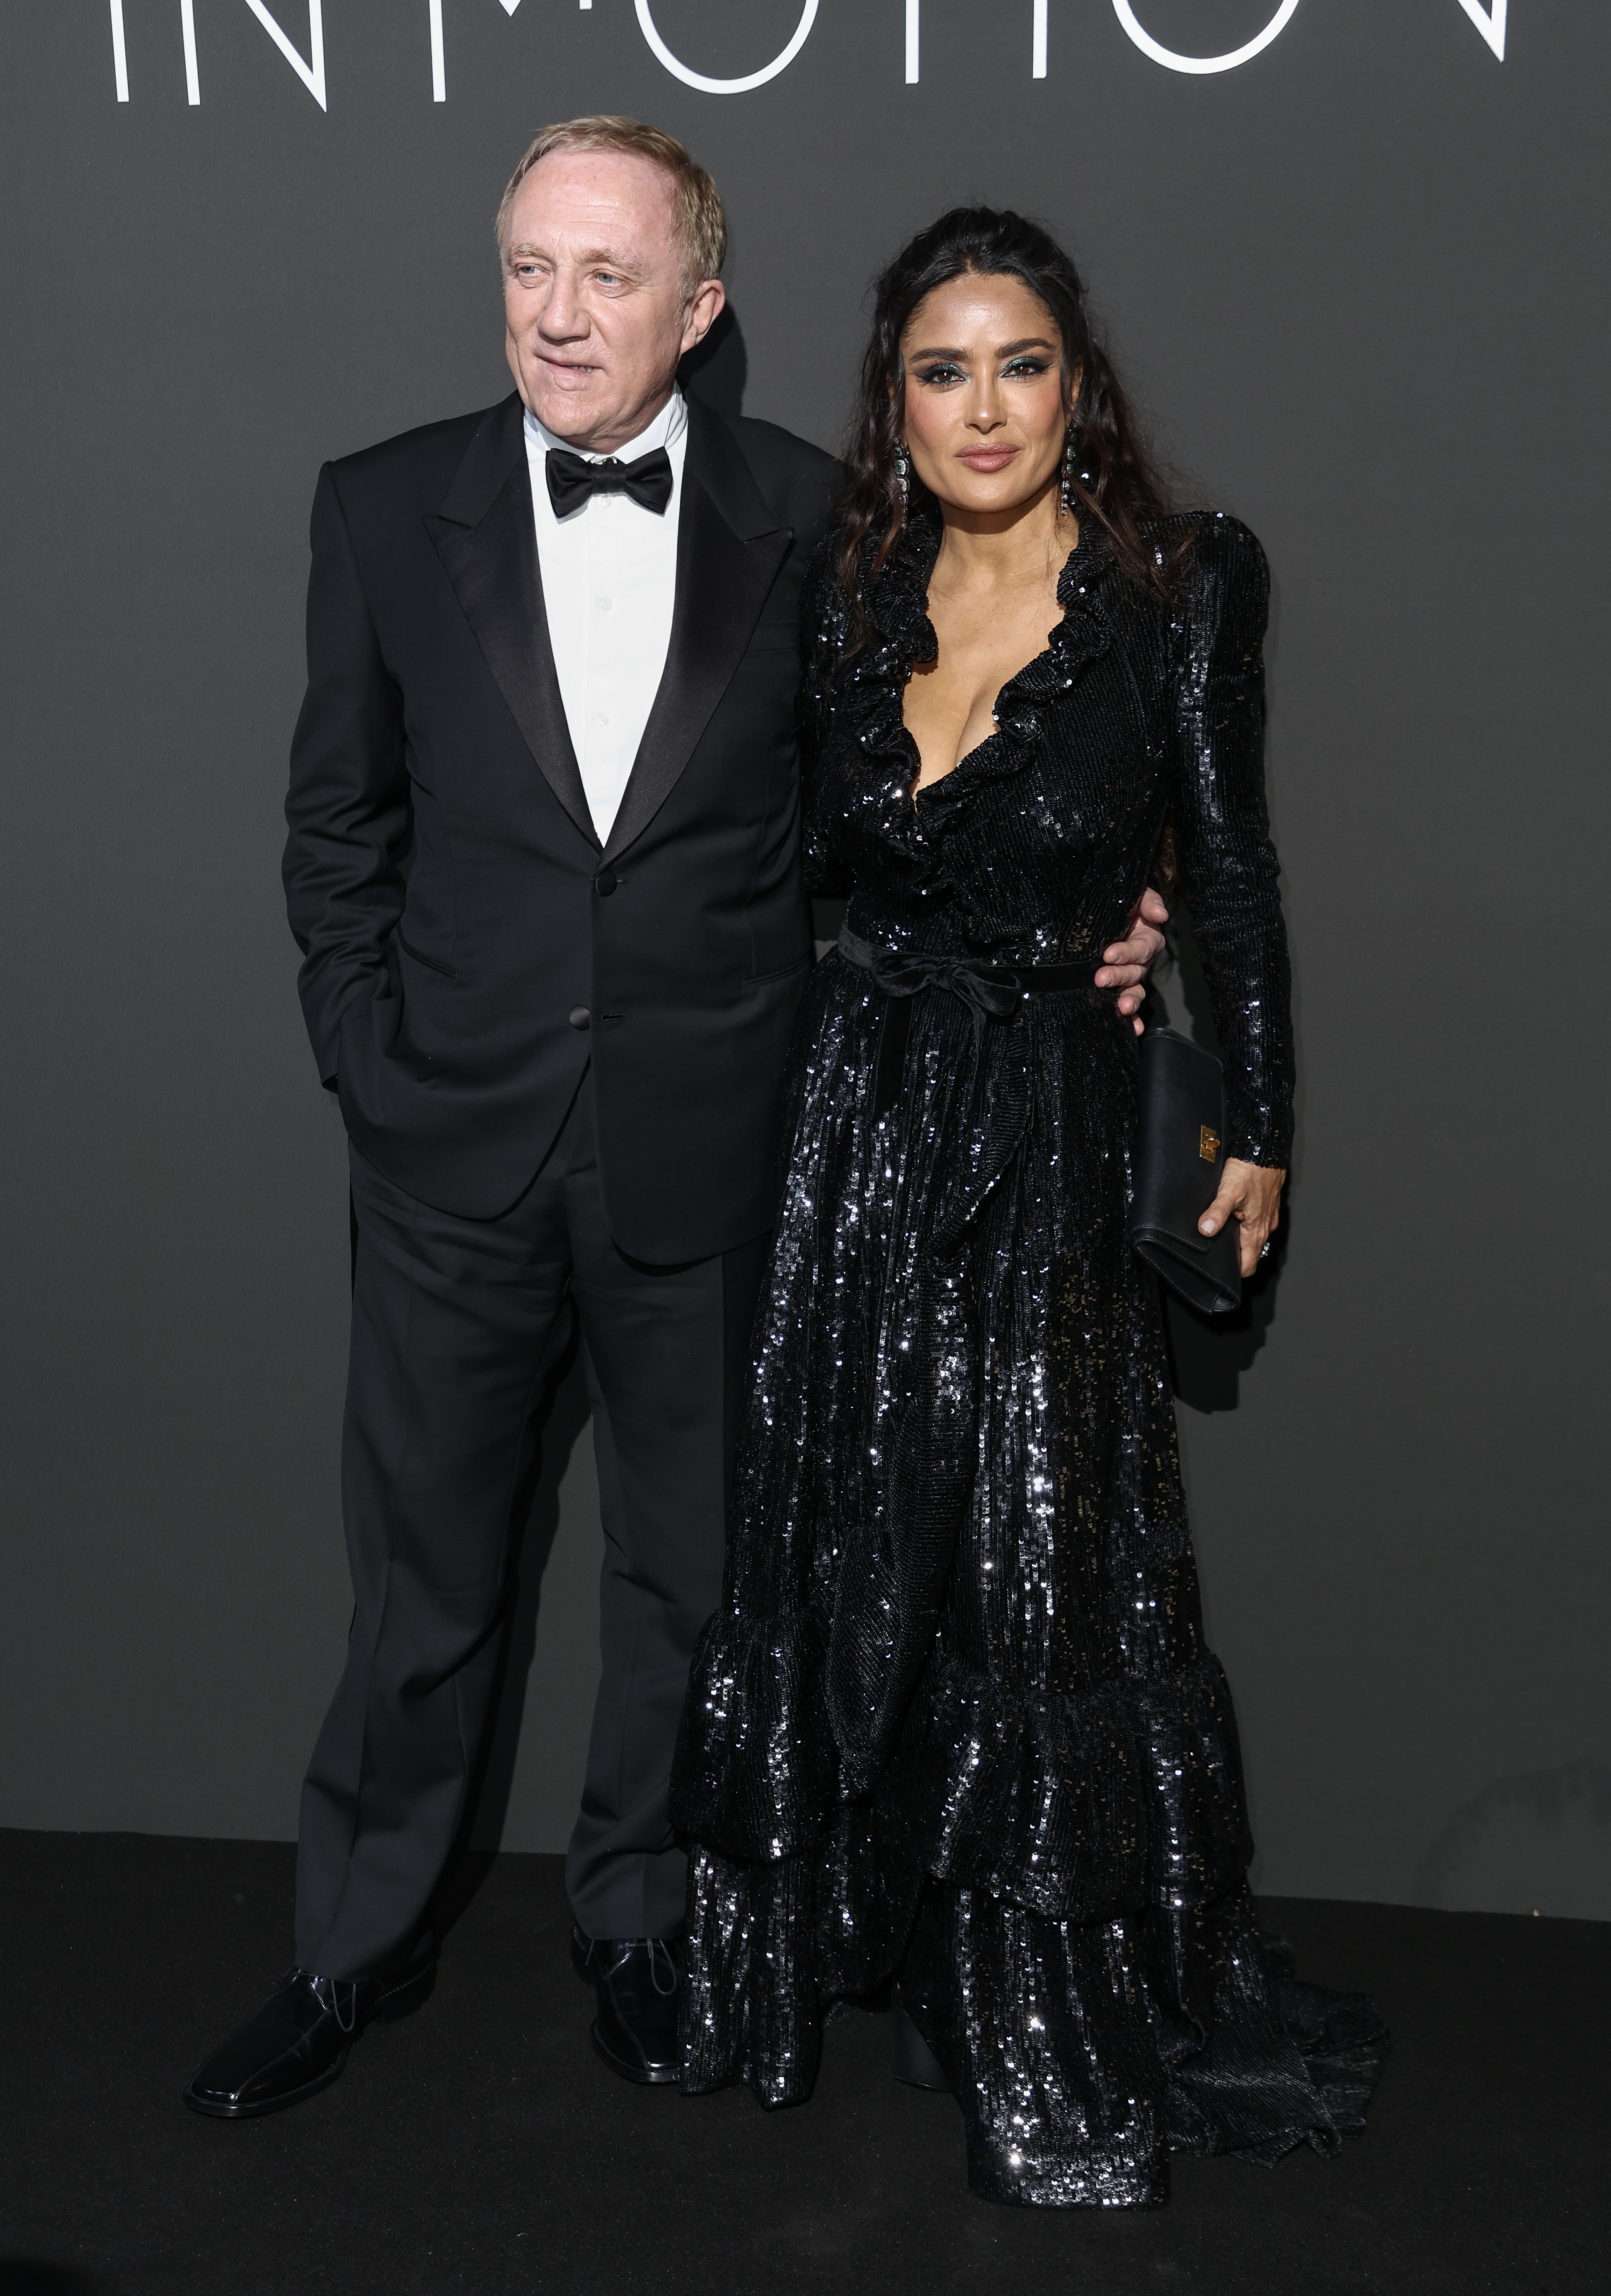 François-Henri Pinault and Salma Hayek at the 2023 "Kering Women in Motion Award" during the 76th annual Cannes film festival | Source: Getty Images